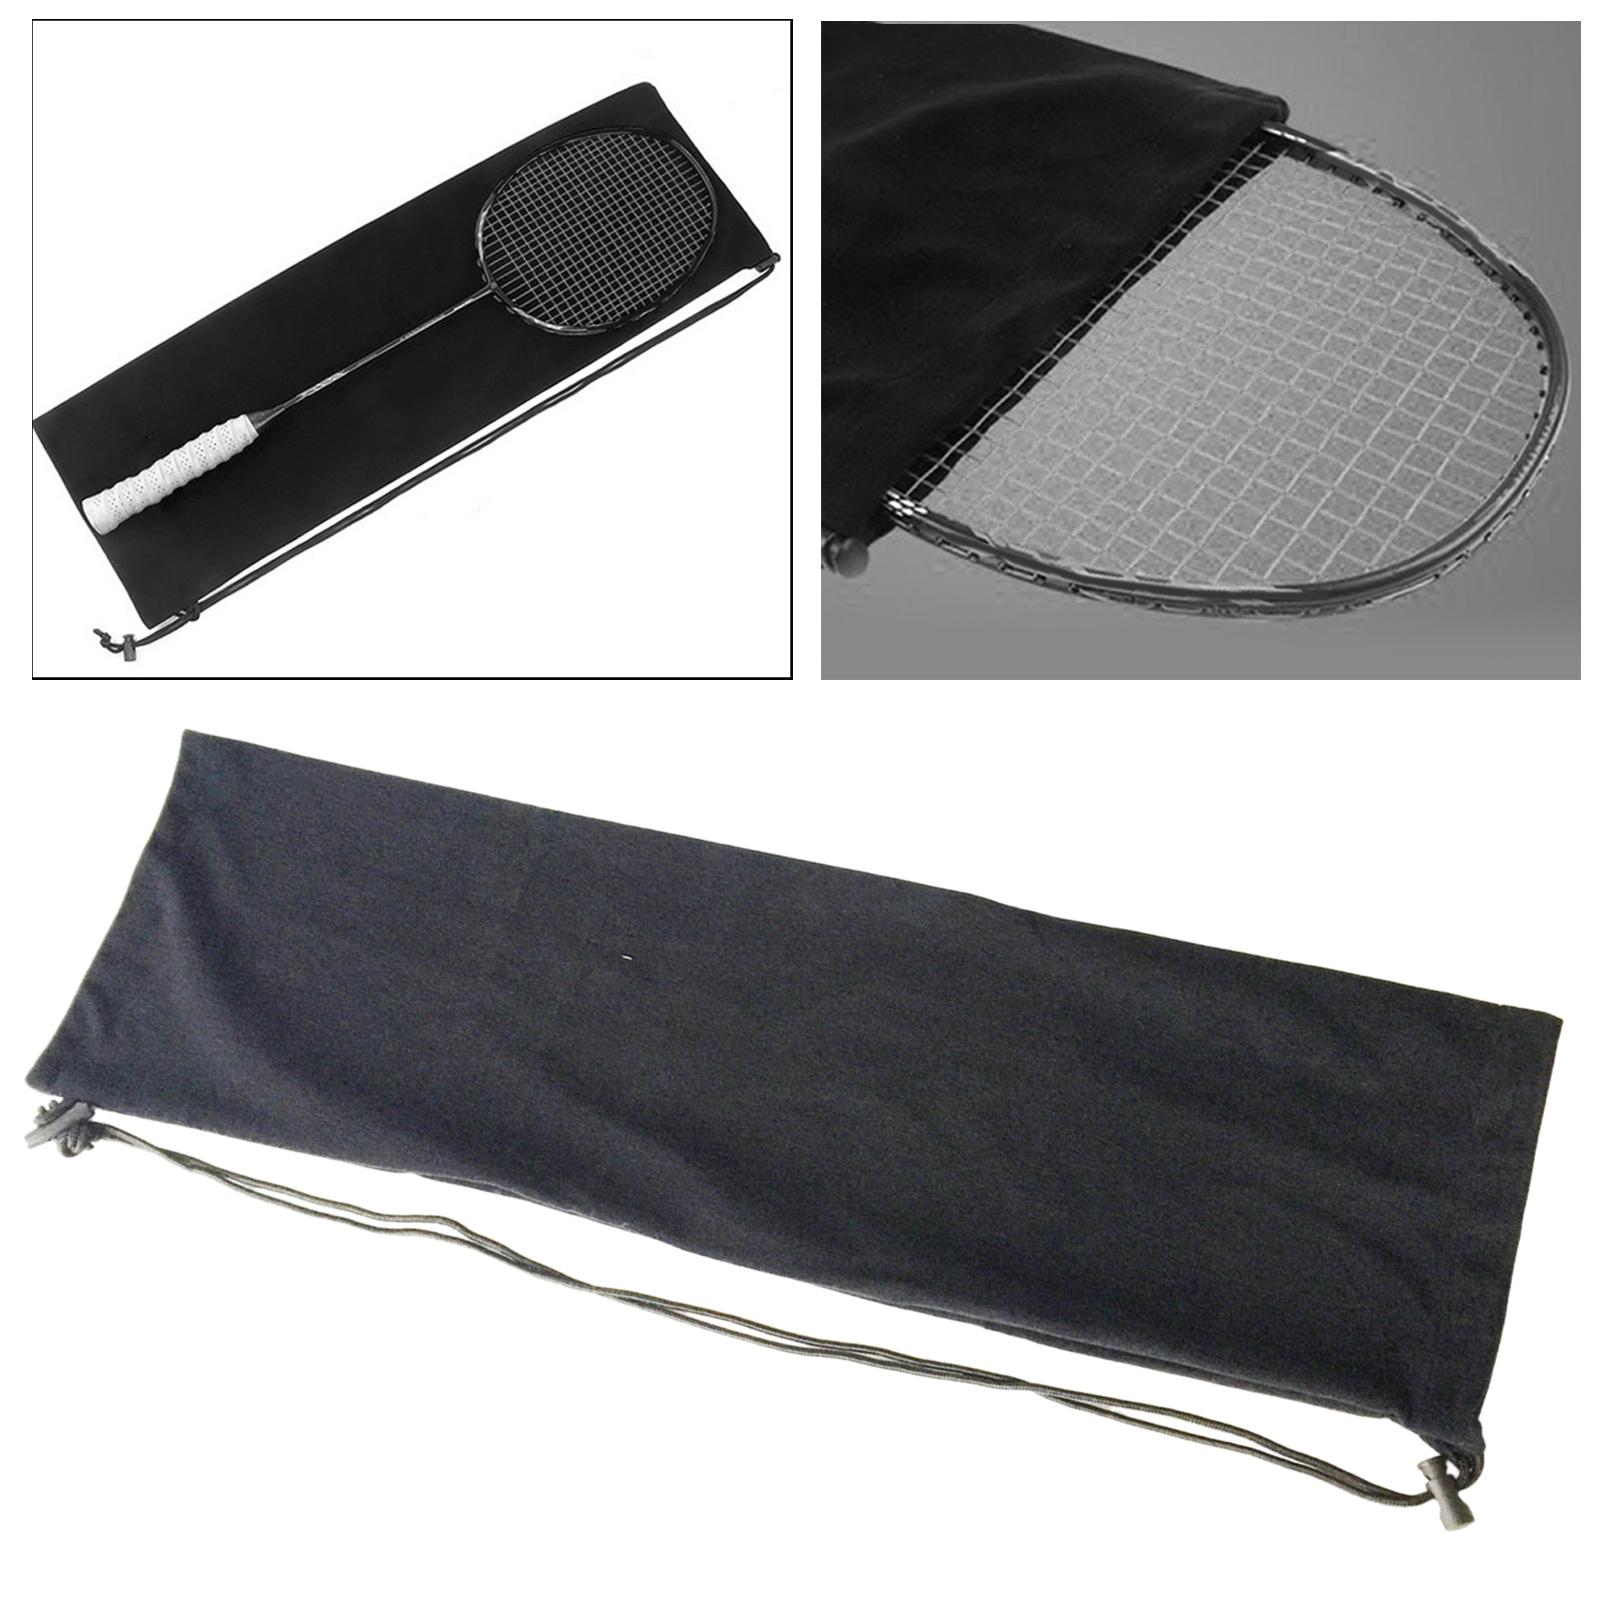 Tennis Racquet Cover Bag Drawstring Storage Bag for Beginner Outdoor Sports